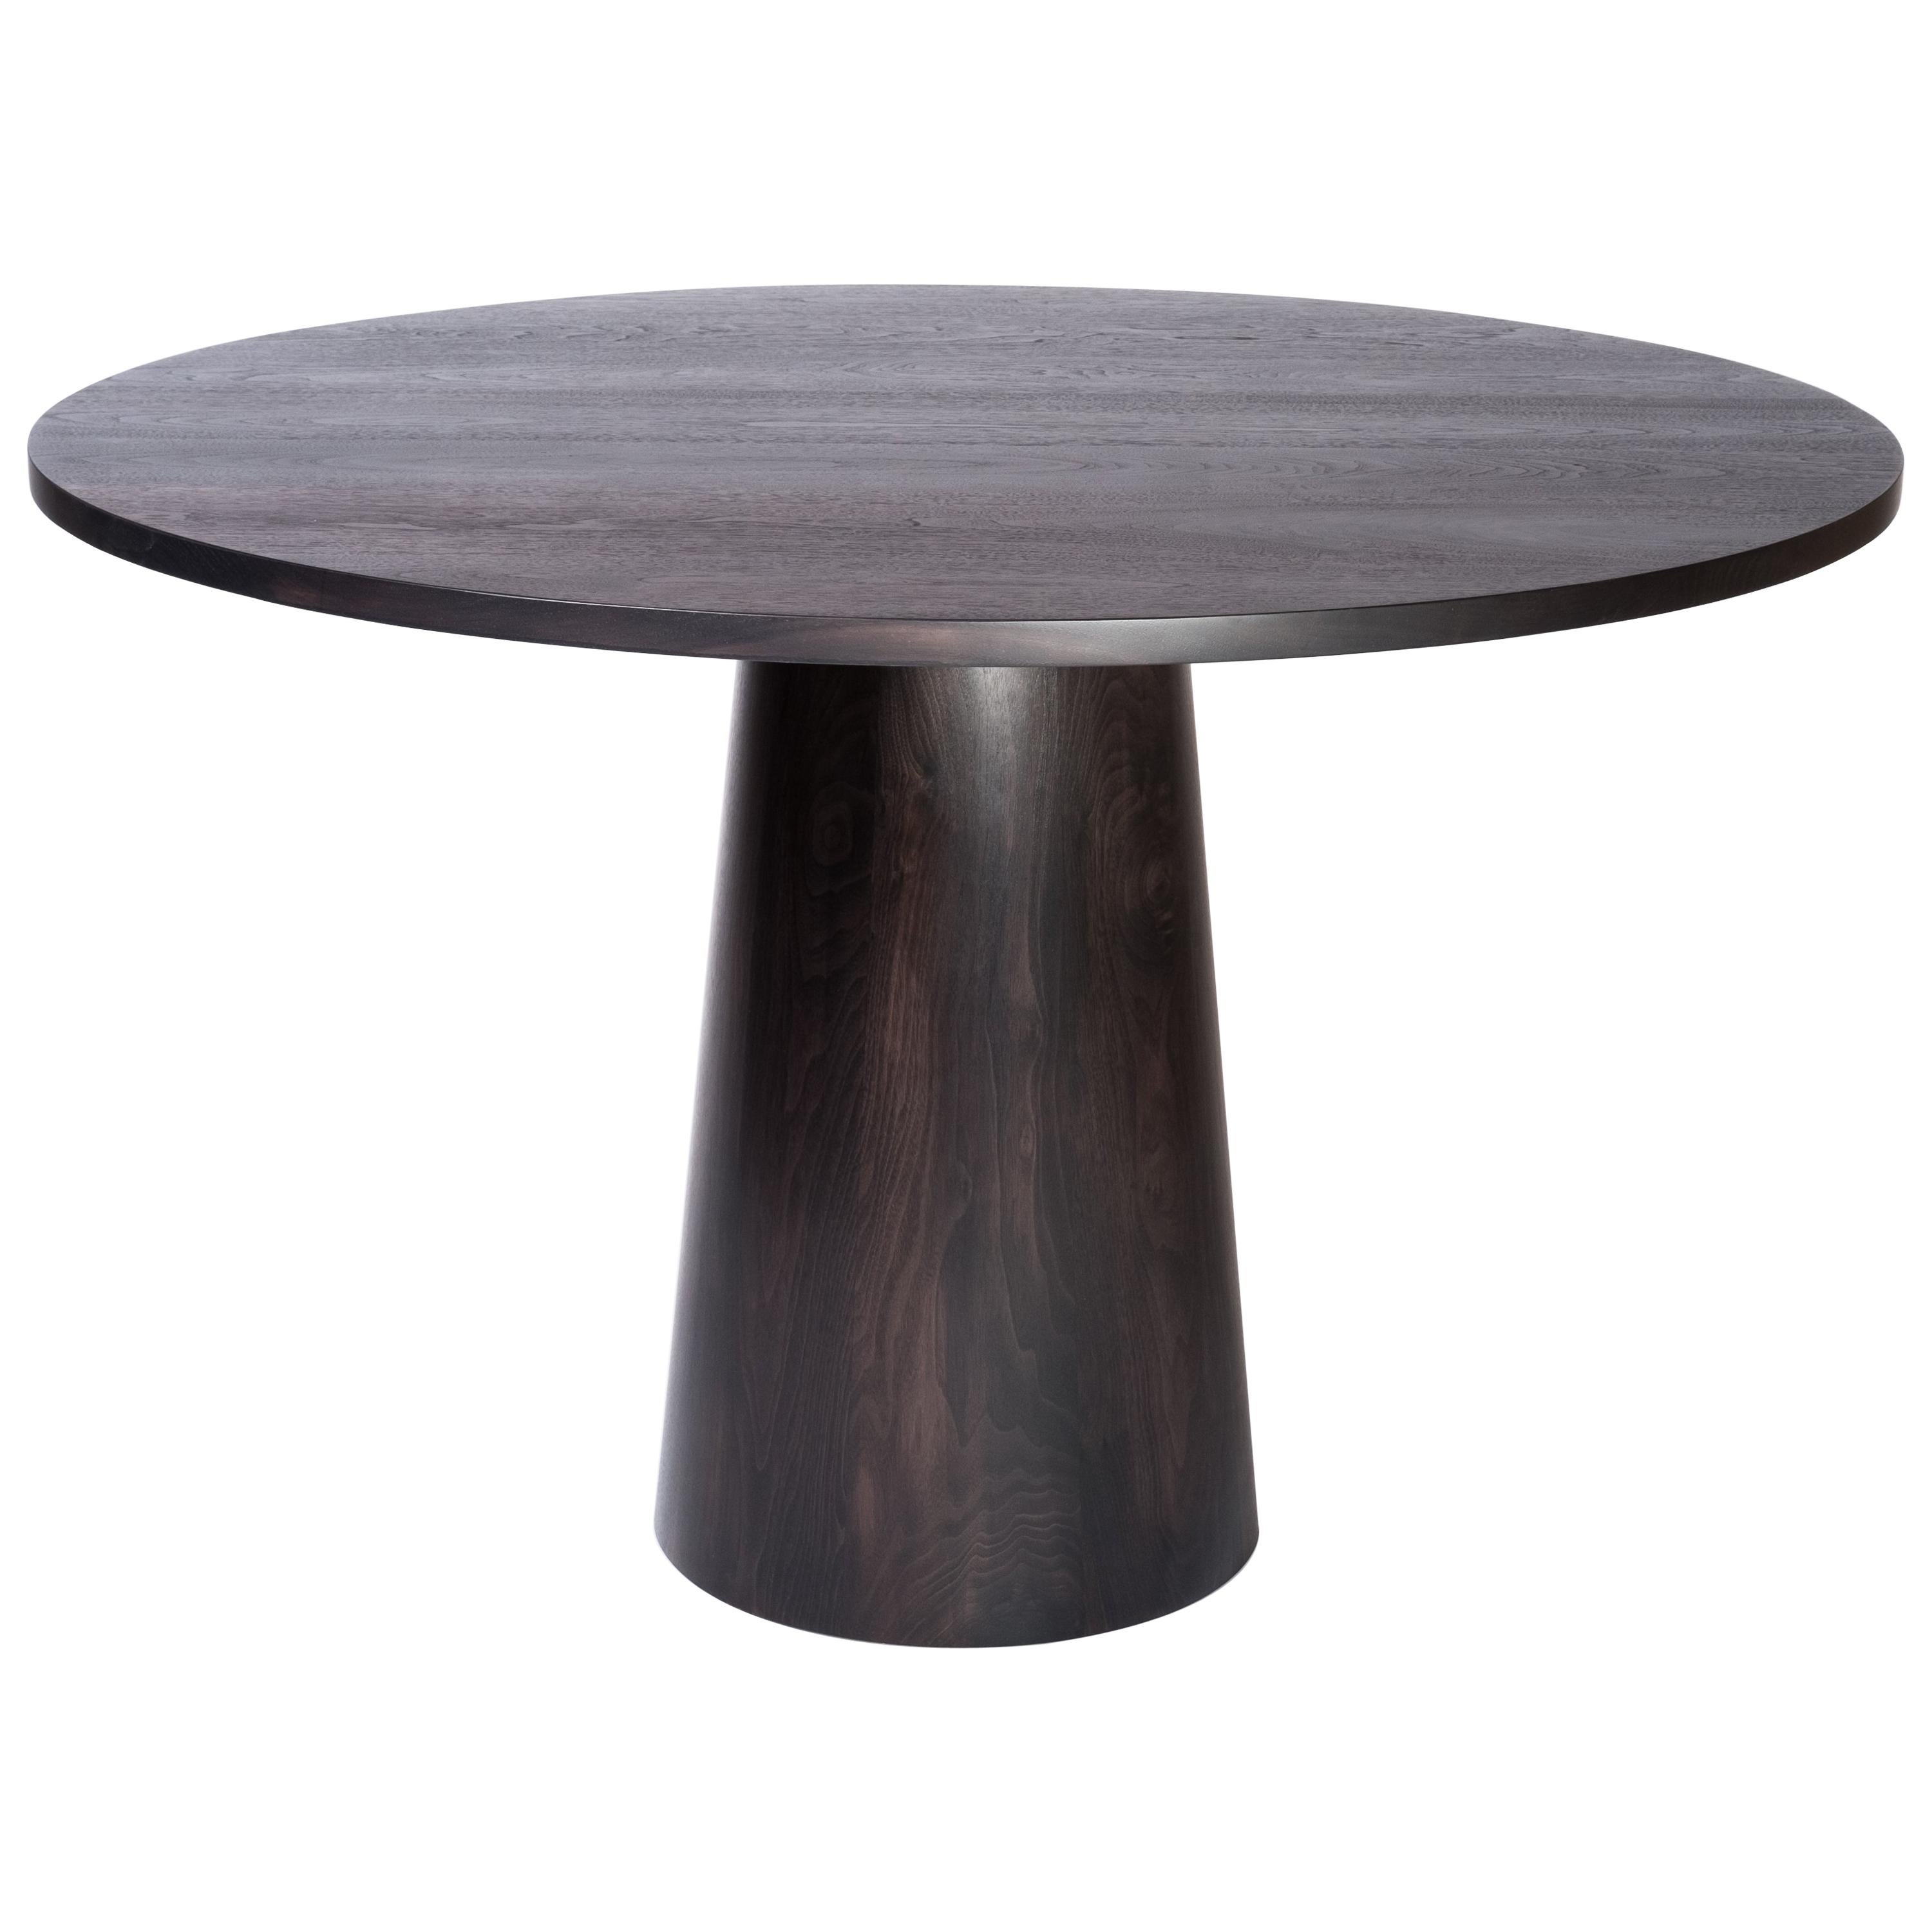 Tabor Dining Table by Tretiak Works, Contemporary Oxidized Walnut Round Pedestal For Sale